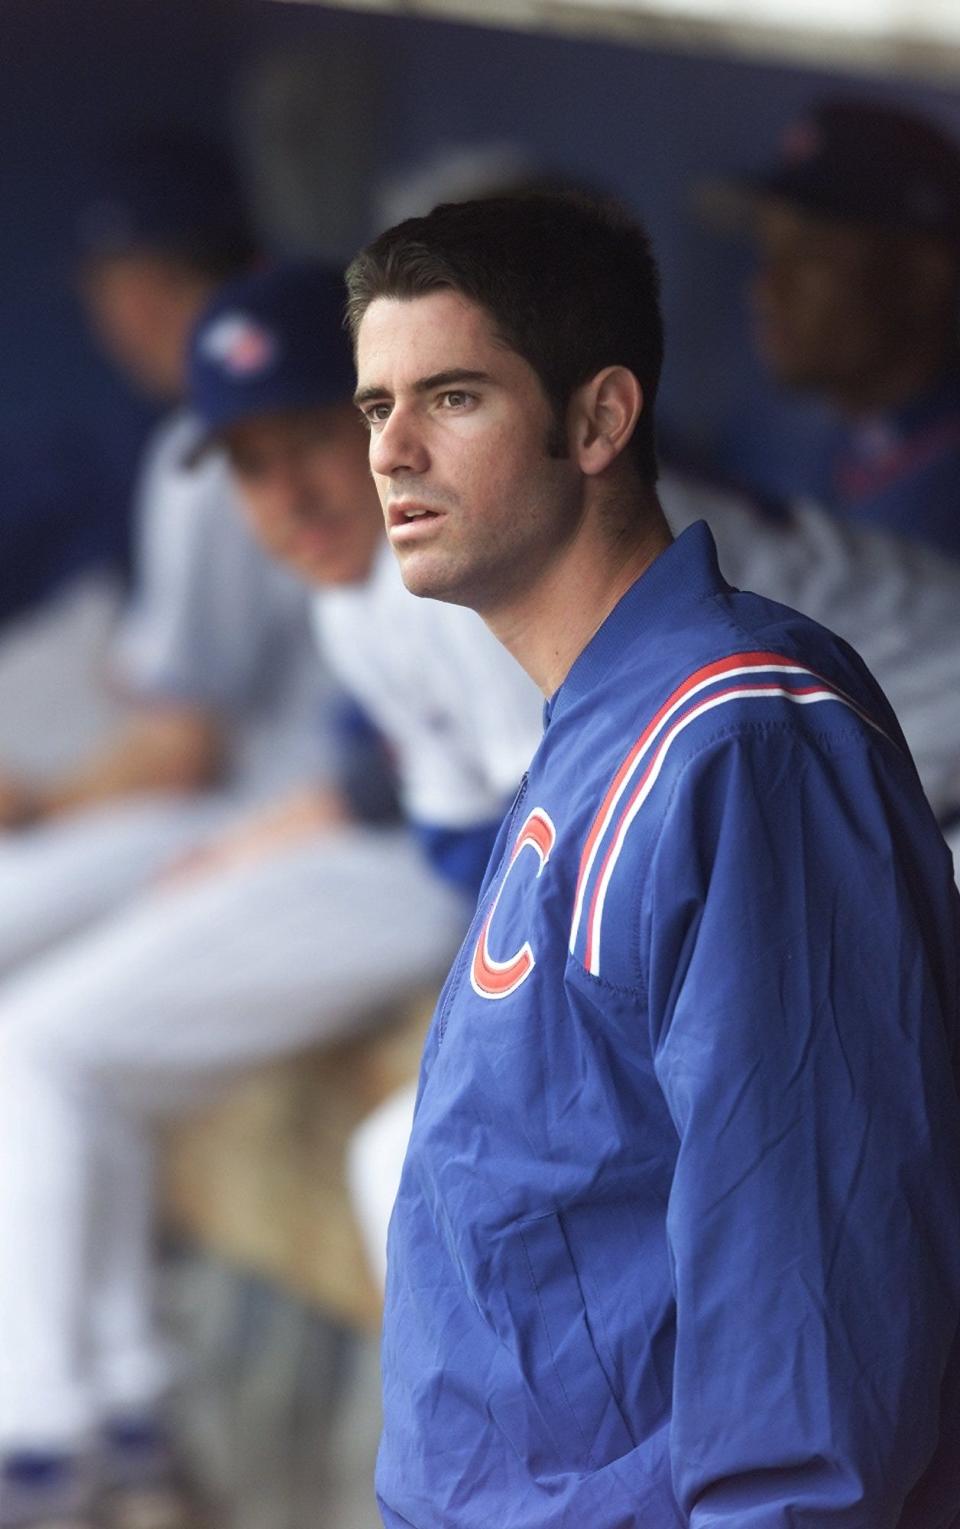 Iowa Cubs pitcher Mark Prior waits in the dugout before the May 7, 2002, game against Tucson at Principal Park.